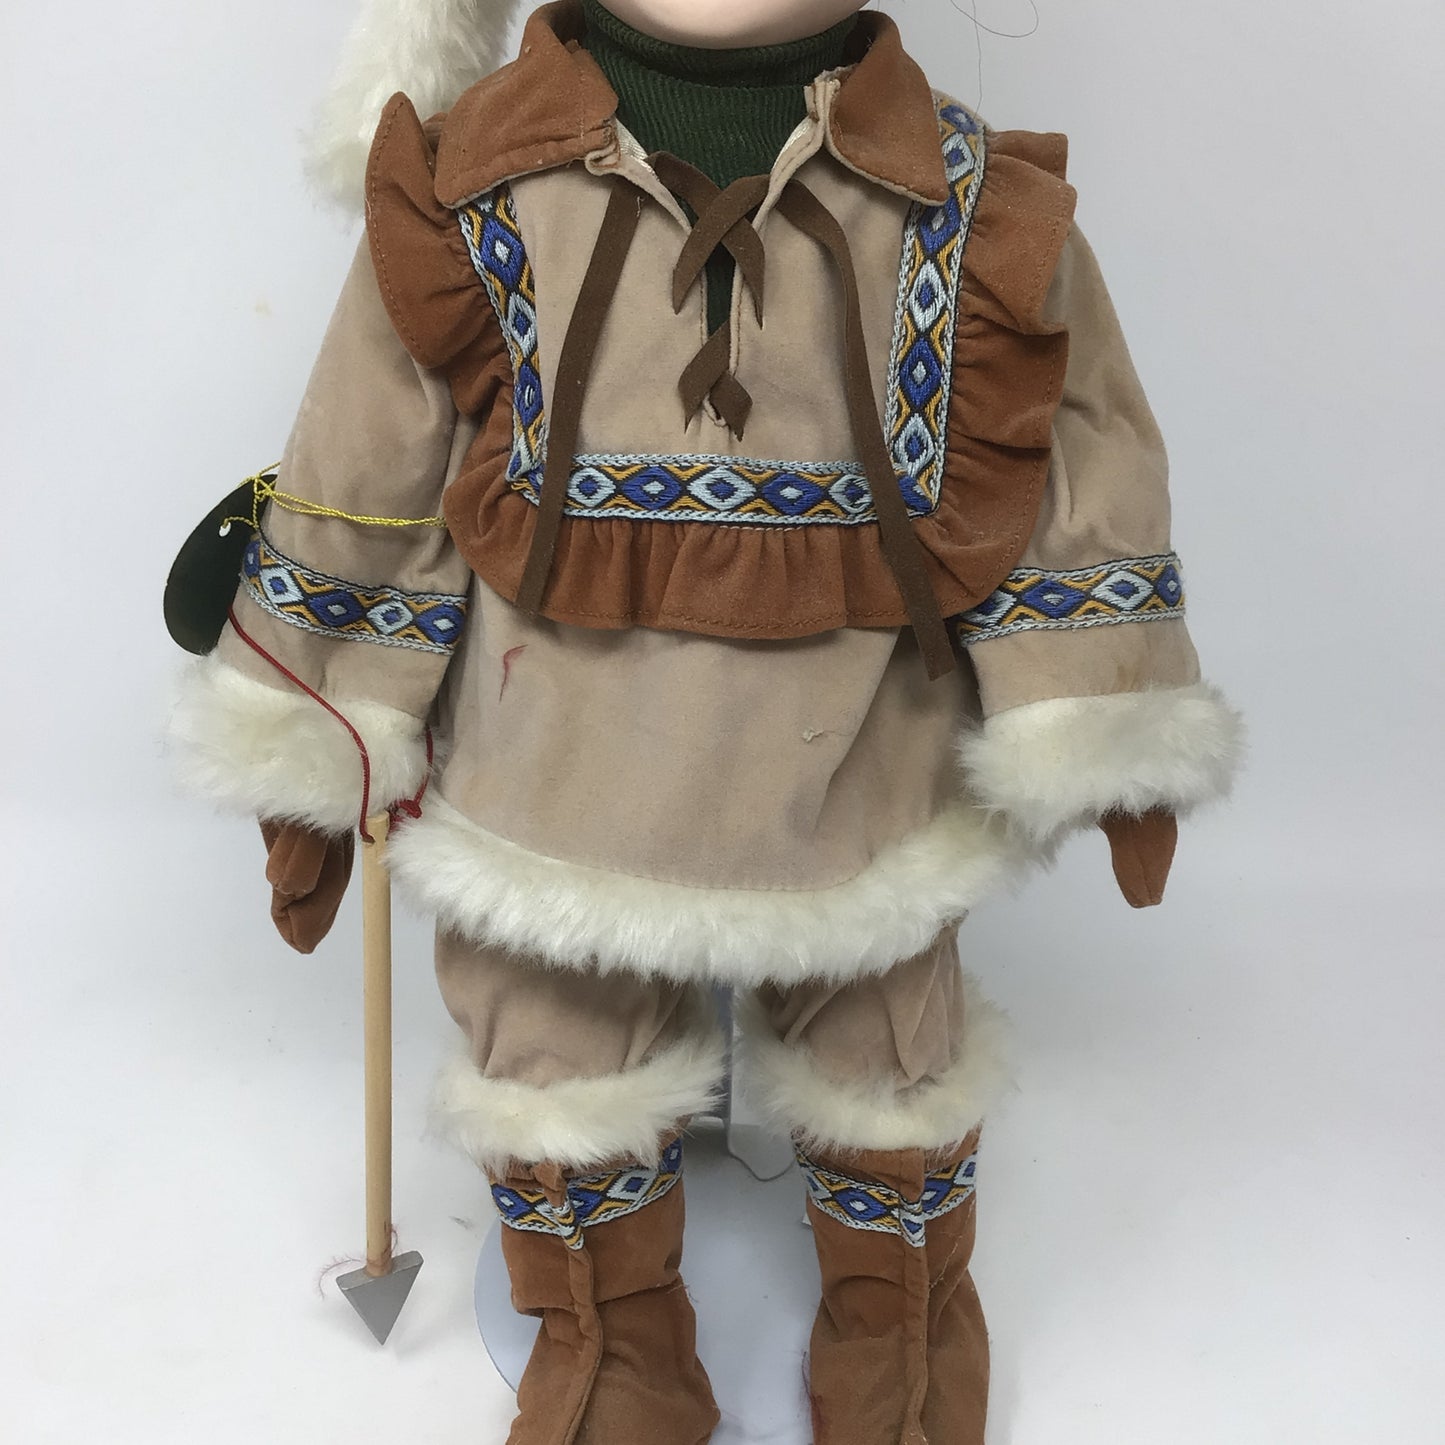 Collectable Century Collection Doll “Chimo”